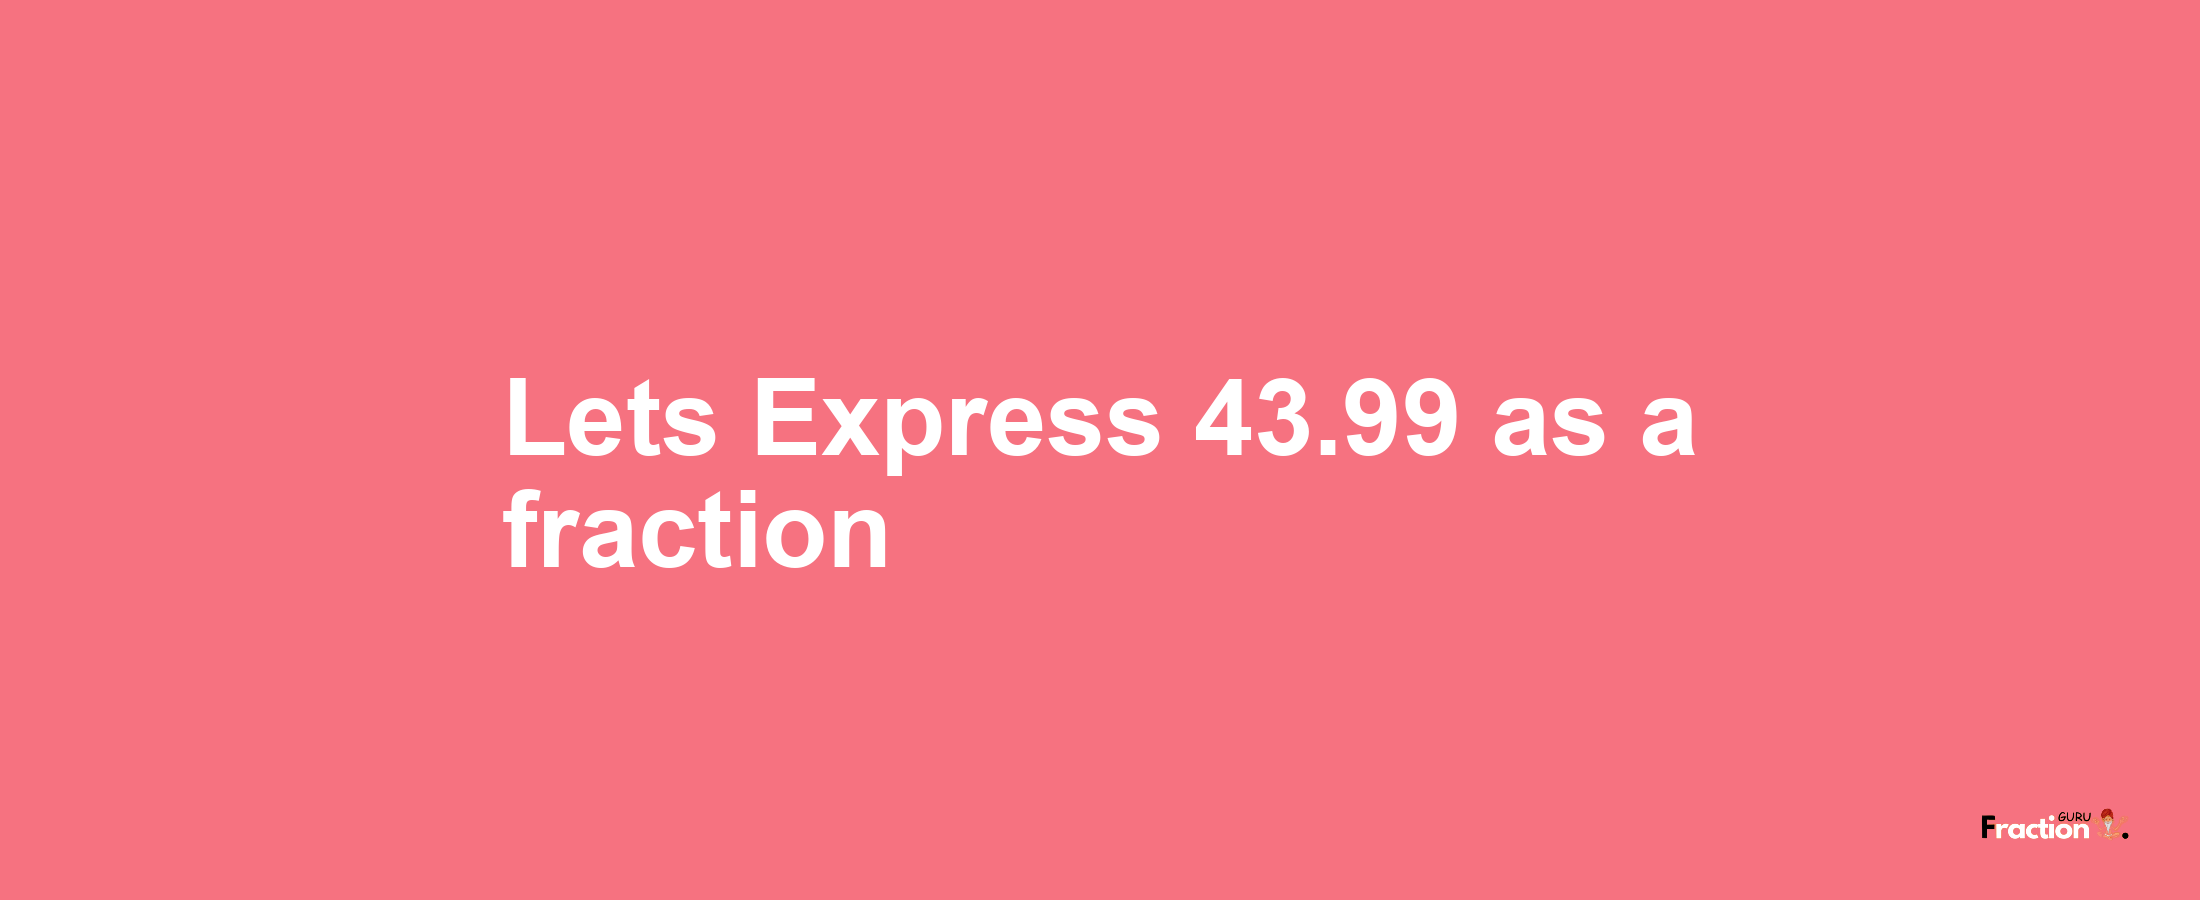 Lets Express 43.99 as afraction